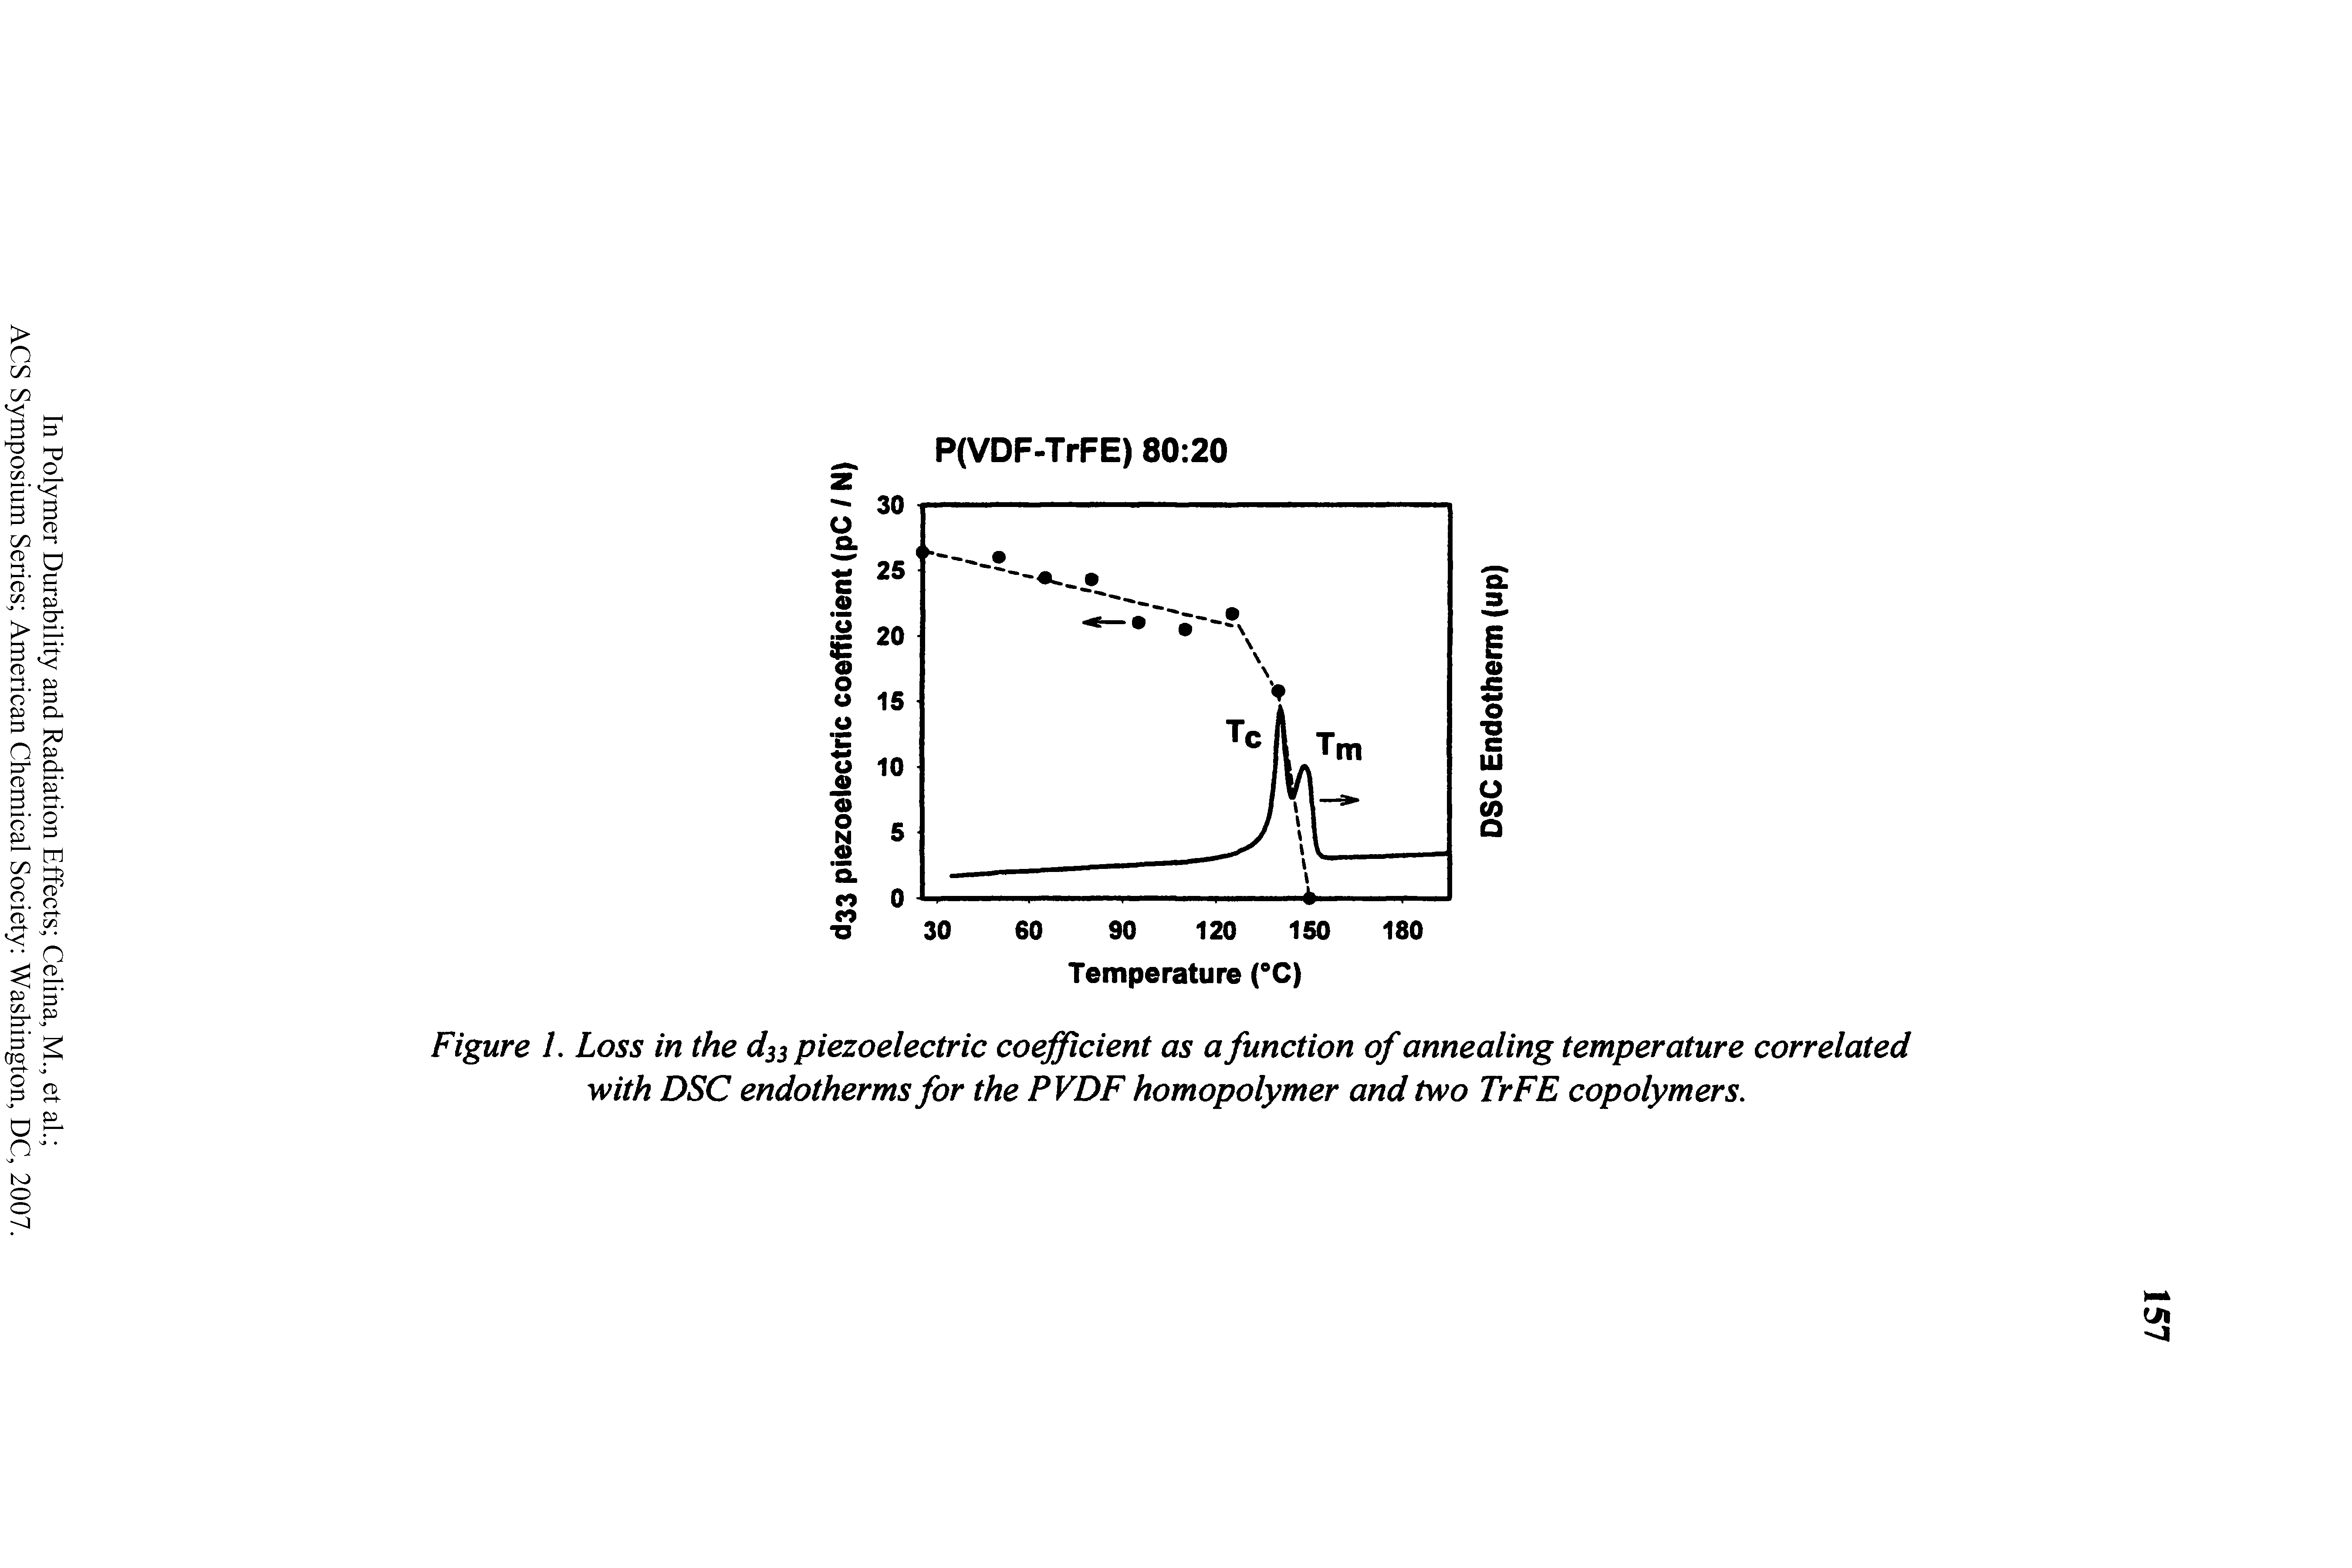 Figure 1. Loss in the d33 piezoelectric coefficient as a function of annealing temperature correlated with DSC endotherms for the PVDF homopolymer and two TrFE copolymers.